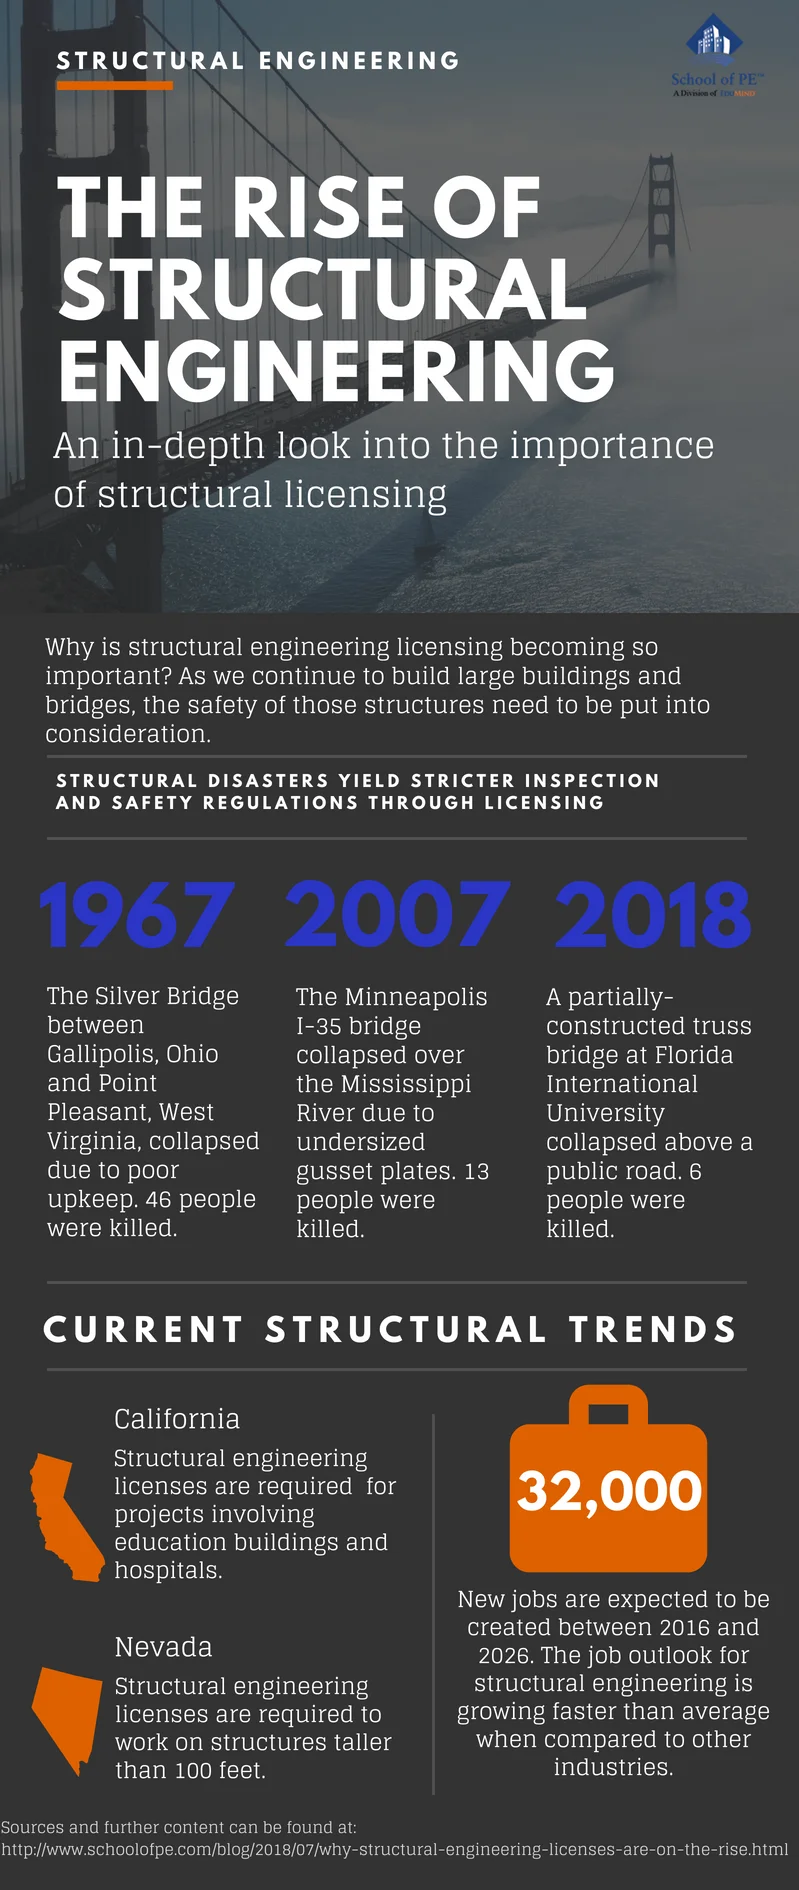 Why Structural Engineering Licenses are on the Rise